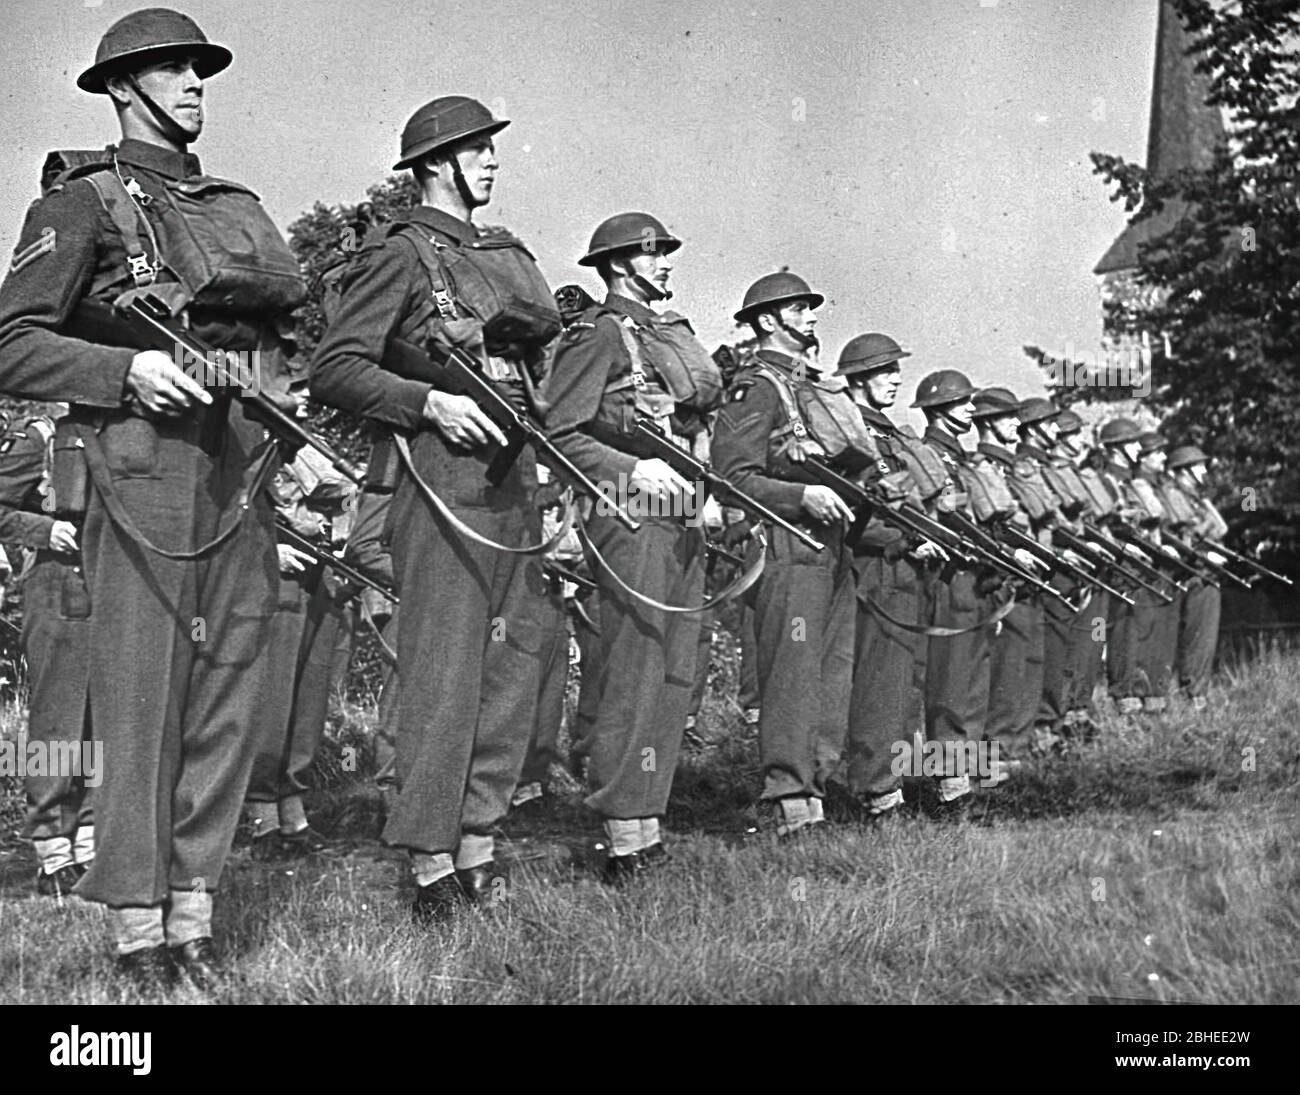 Scottish troops in Second World War. Scots Guards 1942 Stock Photo - Alamy